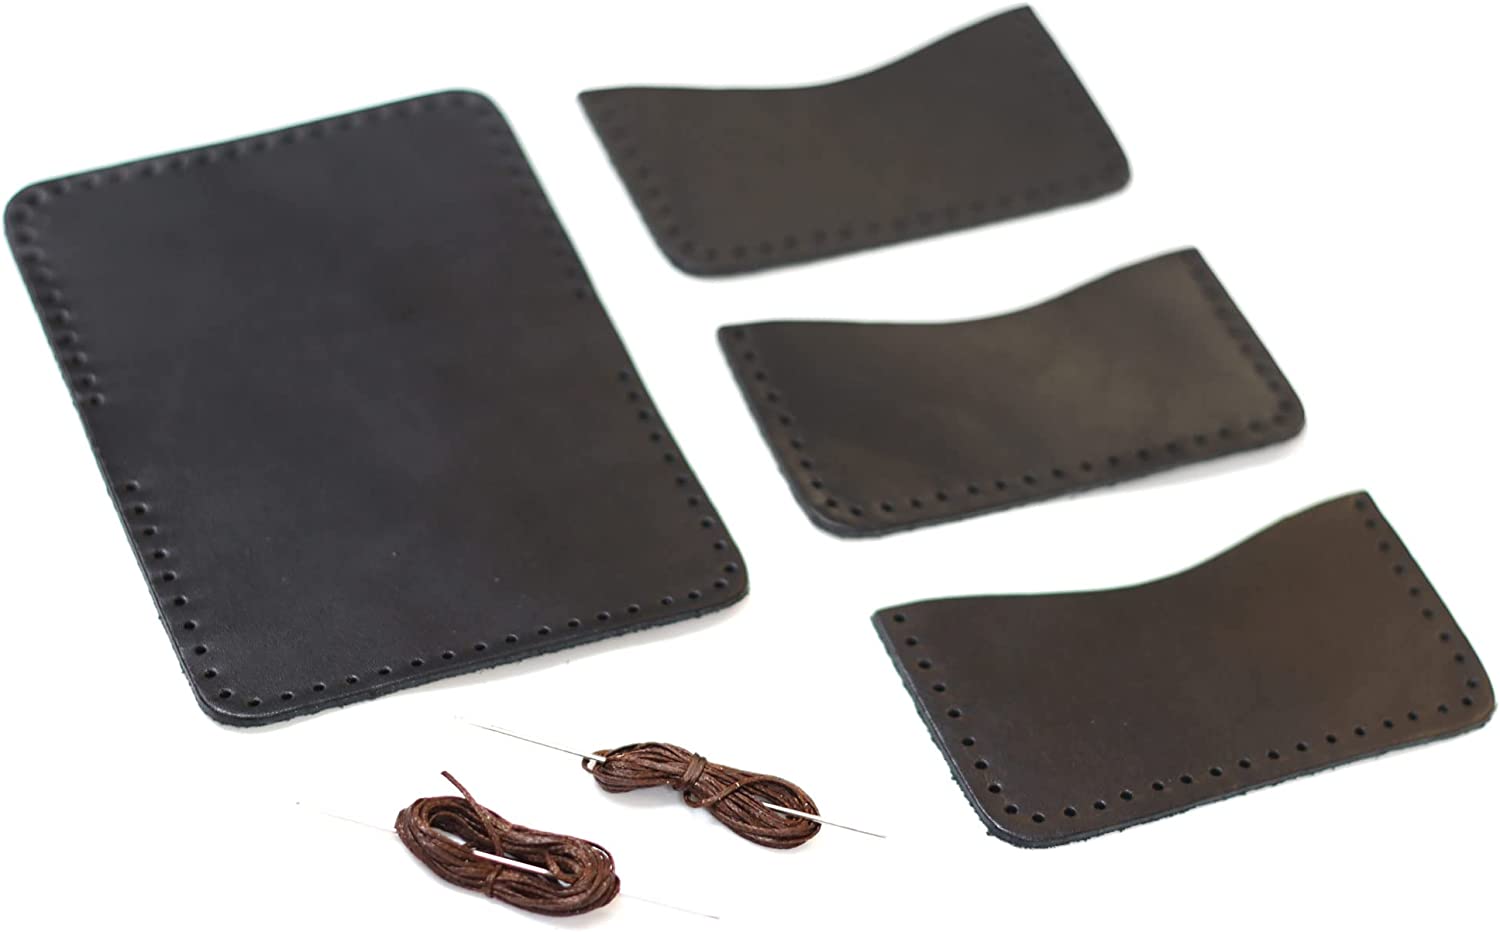 DIY Leather Bifold Wallet Kit - Do It Your Own Vegetable Tanned